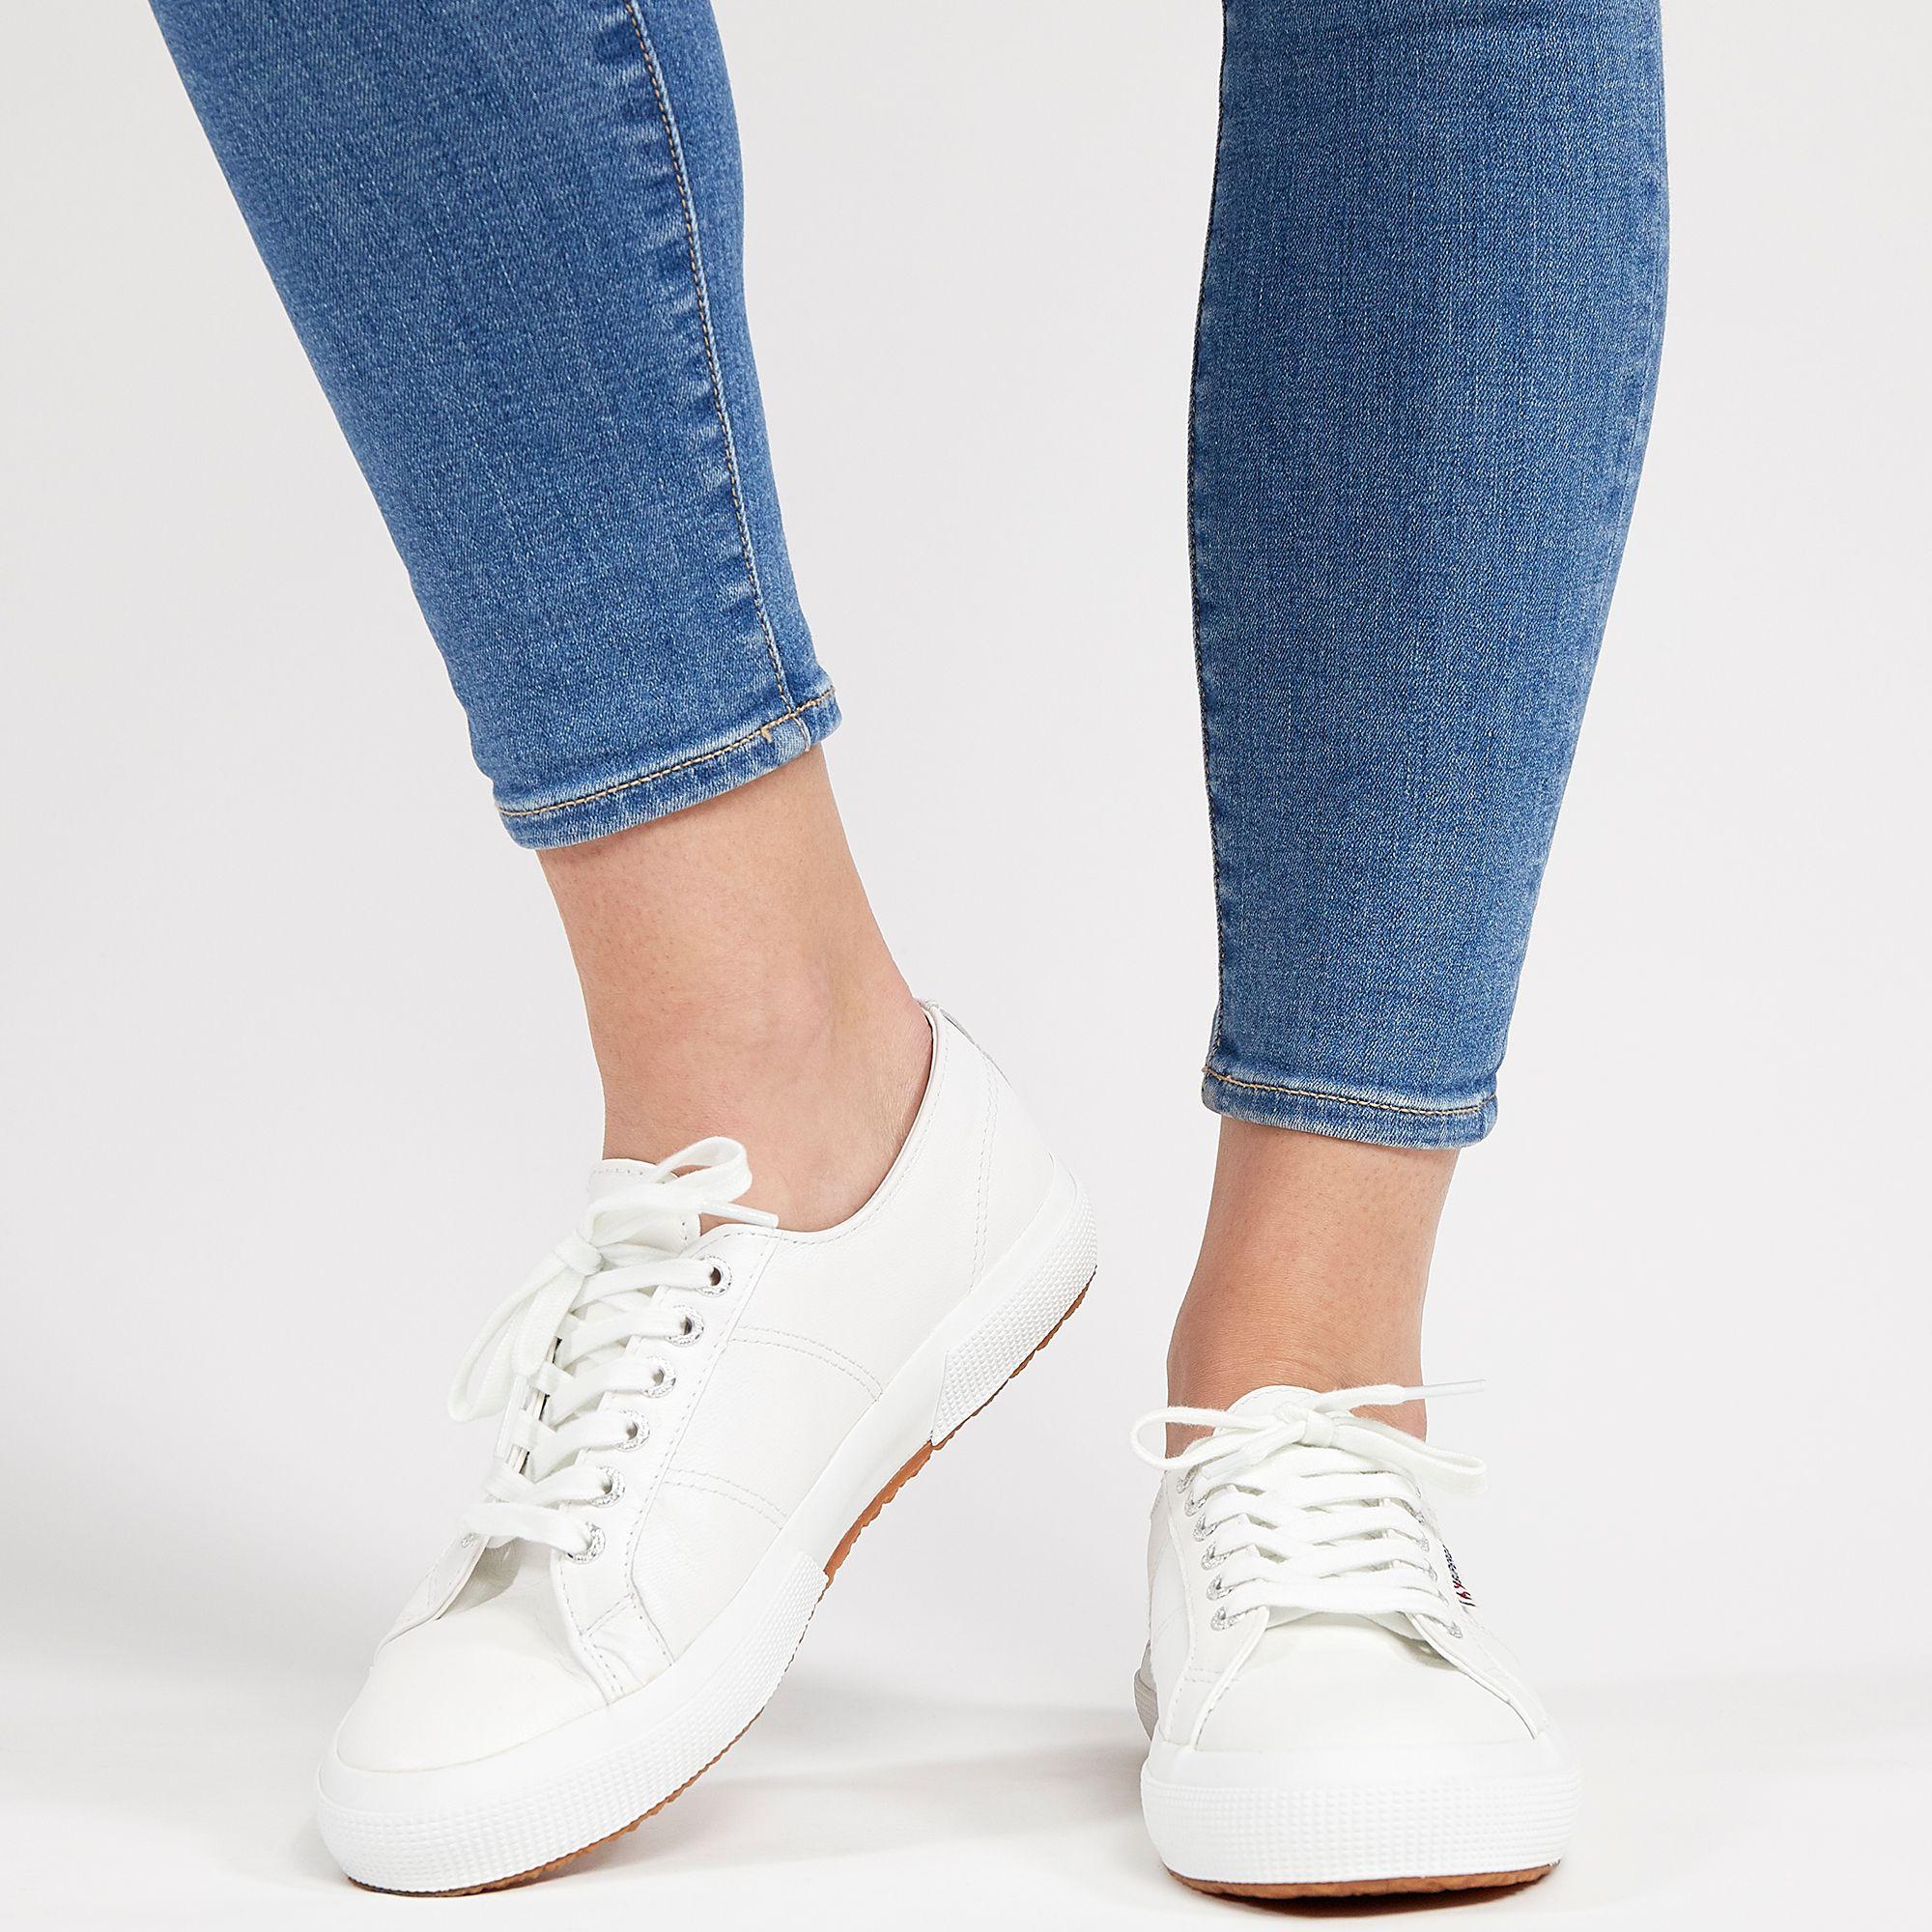 Superga 2750 Nappaleau Leather Classic Shoes in White/Leather (White ...